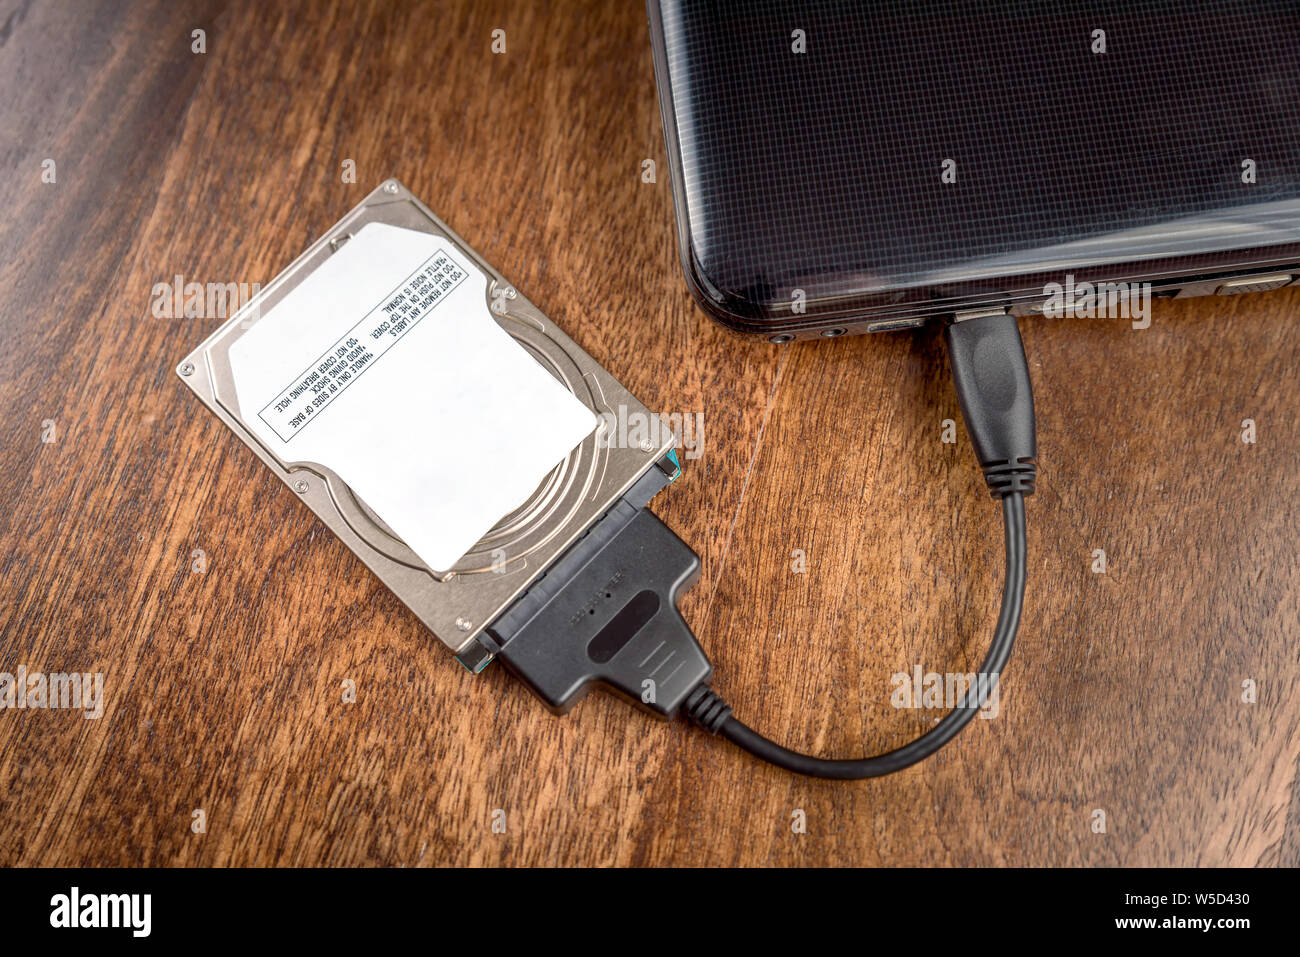 hdd 2.5 internal hard drive disk connected to laptop via sata usb cable on  wooden table closeup view Stock Photo - Alamy